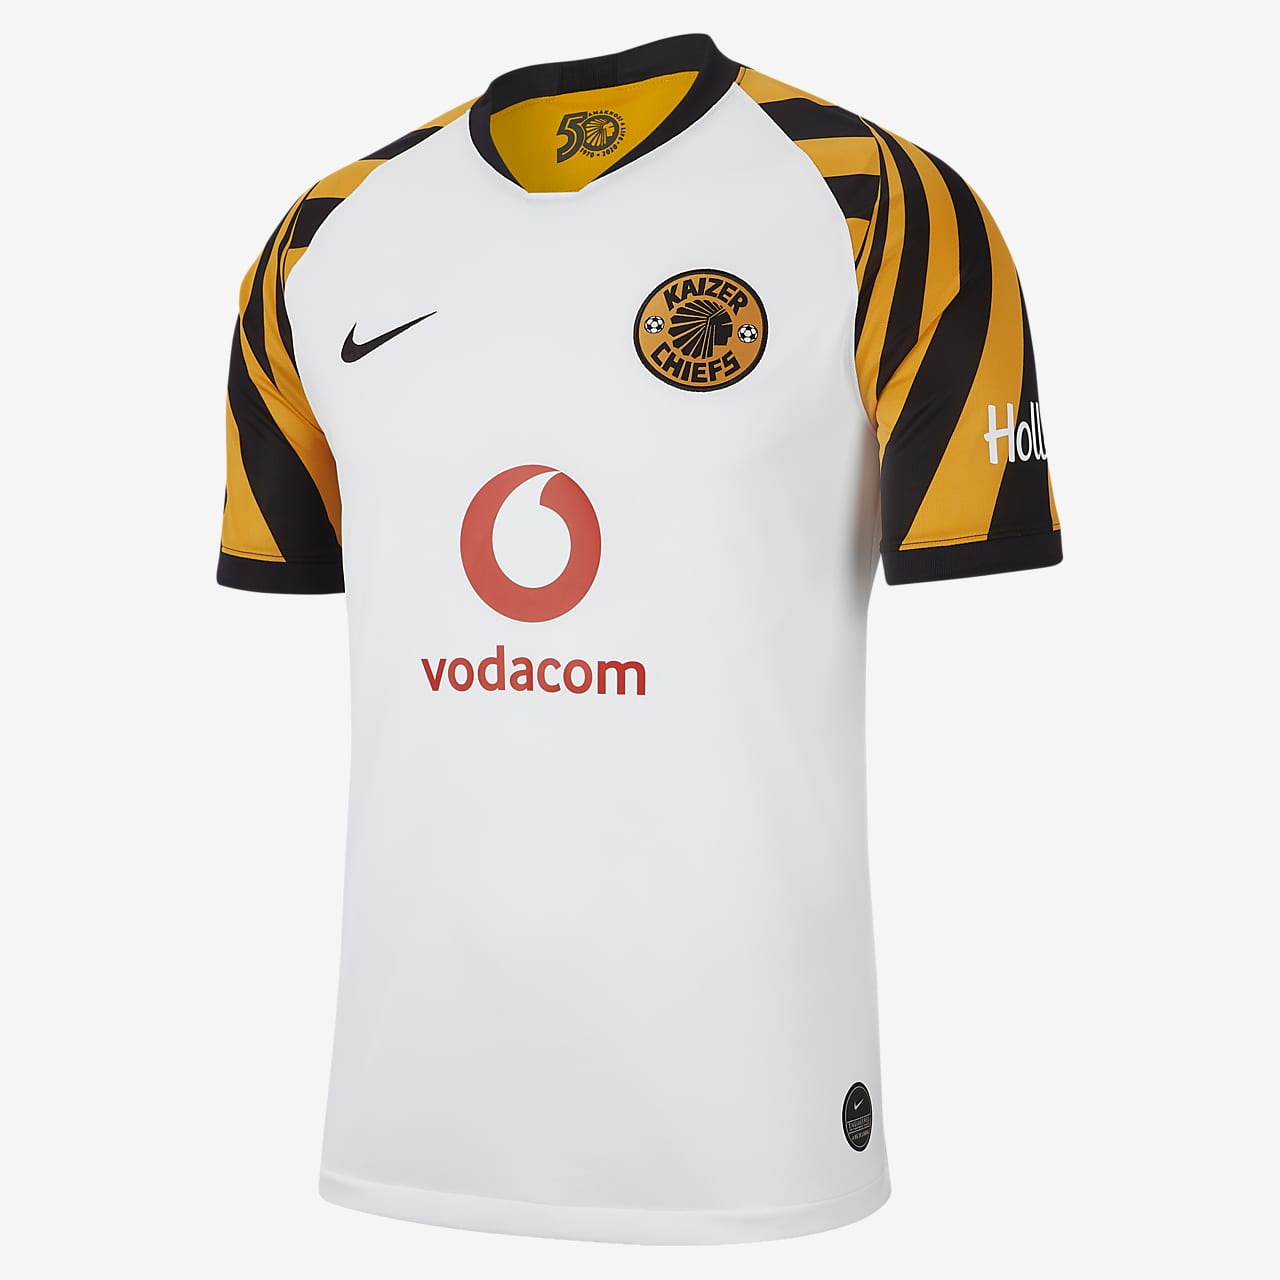 kaizer chiefs jersey for sale